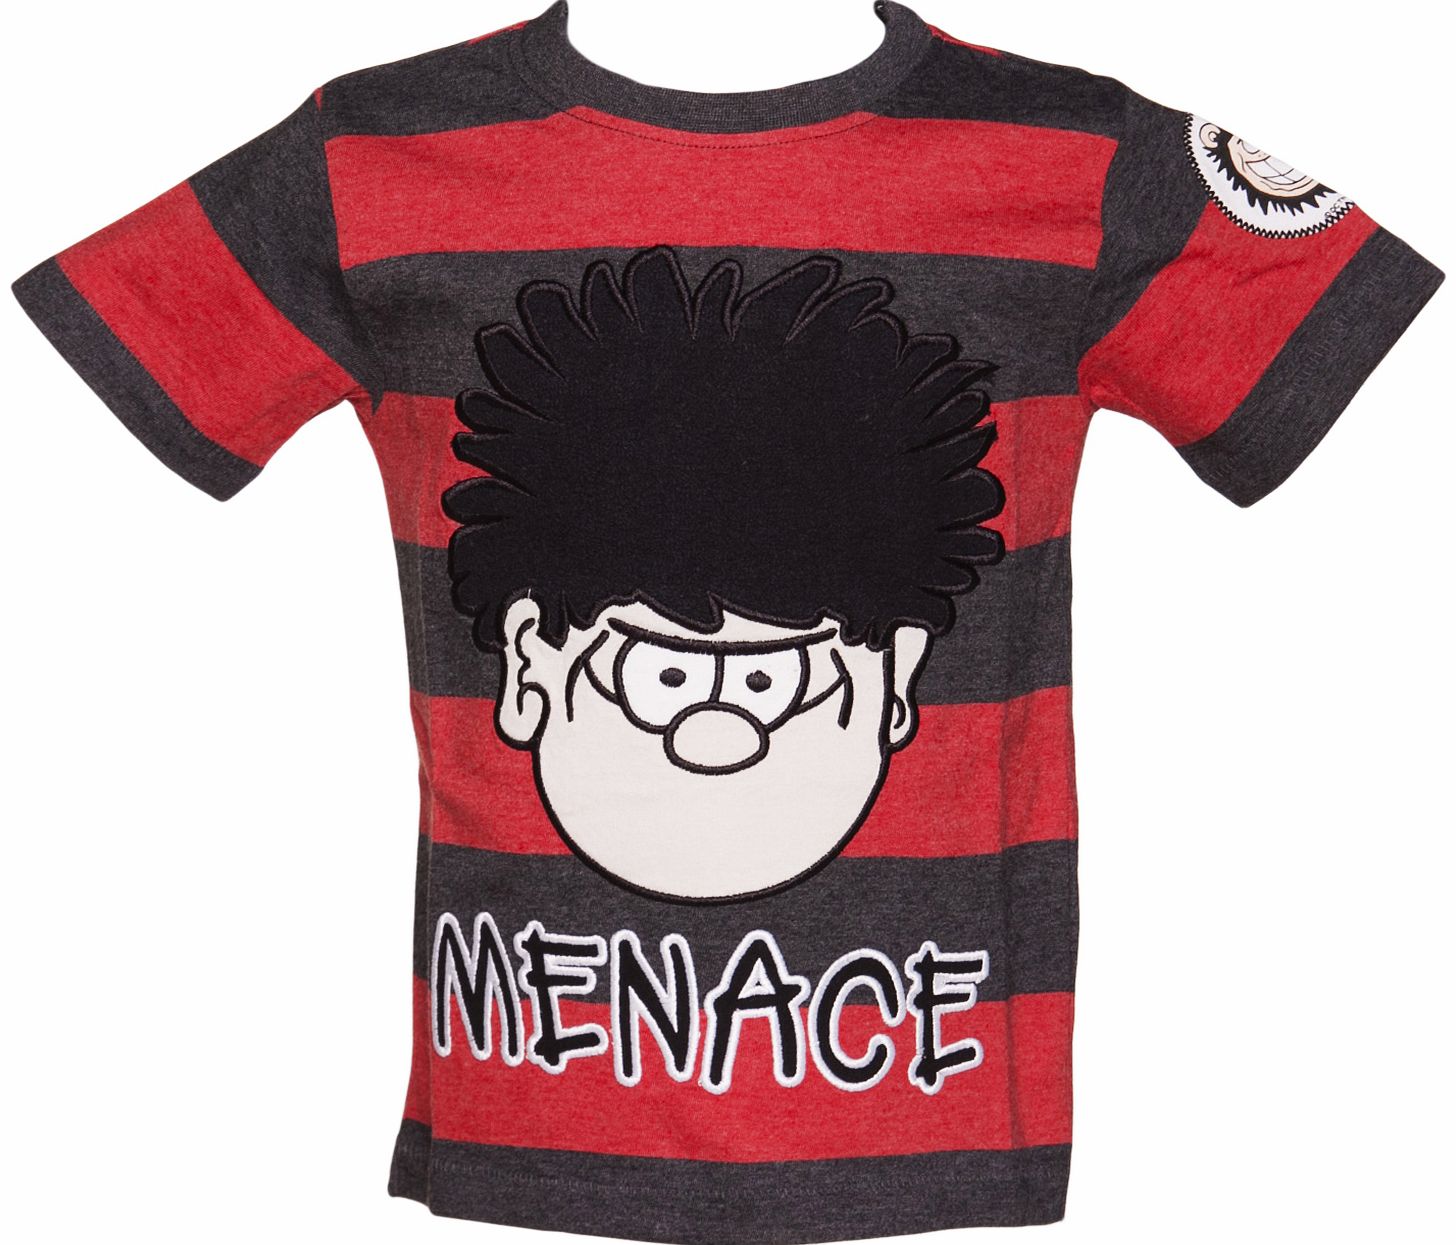 Kids Black And Red Dennis The Menace T-Shirt